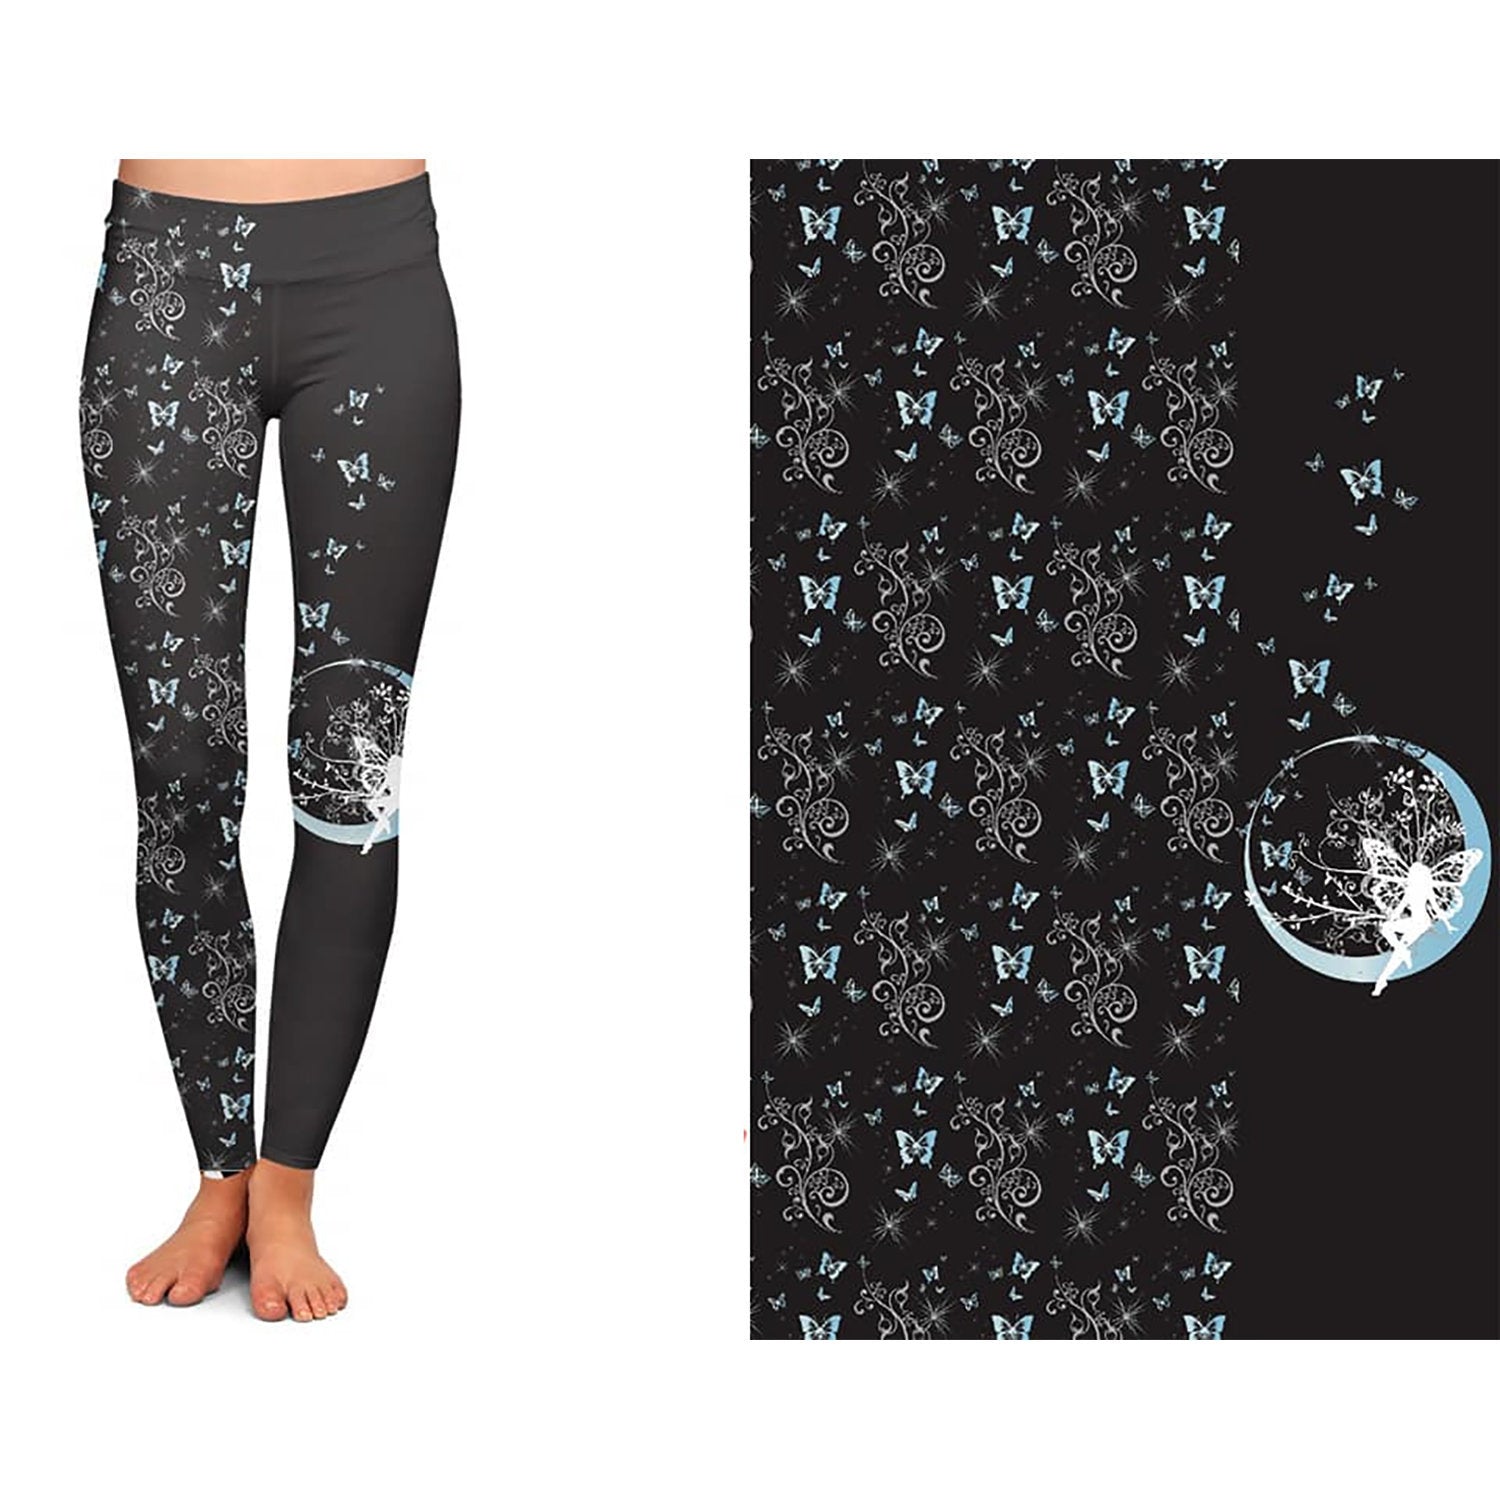 Black, Blue, White Leggings with Fairy - Pockets - Ready to Ship